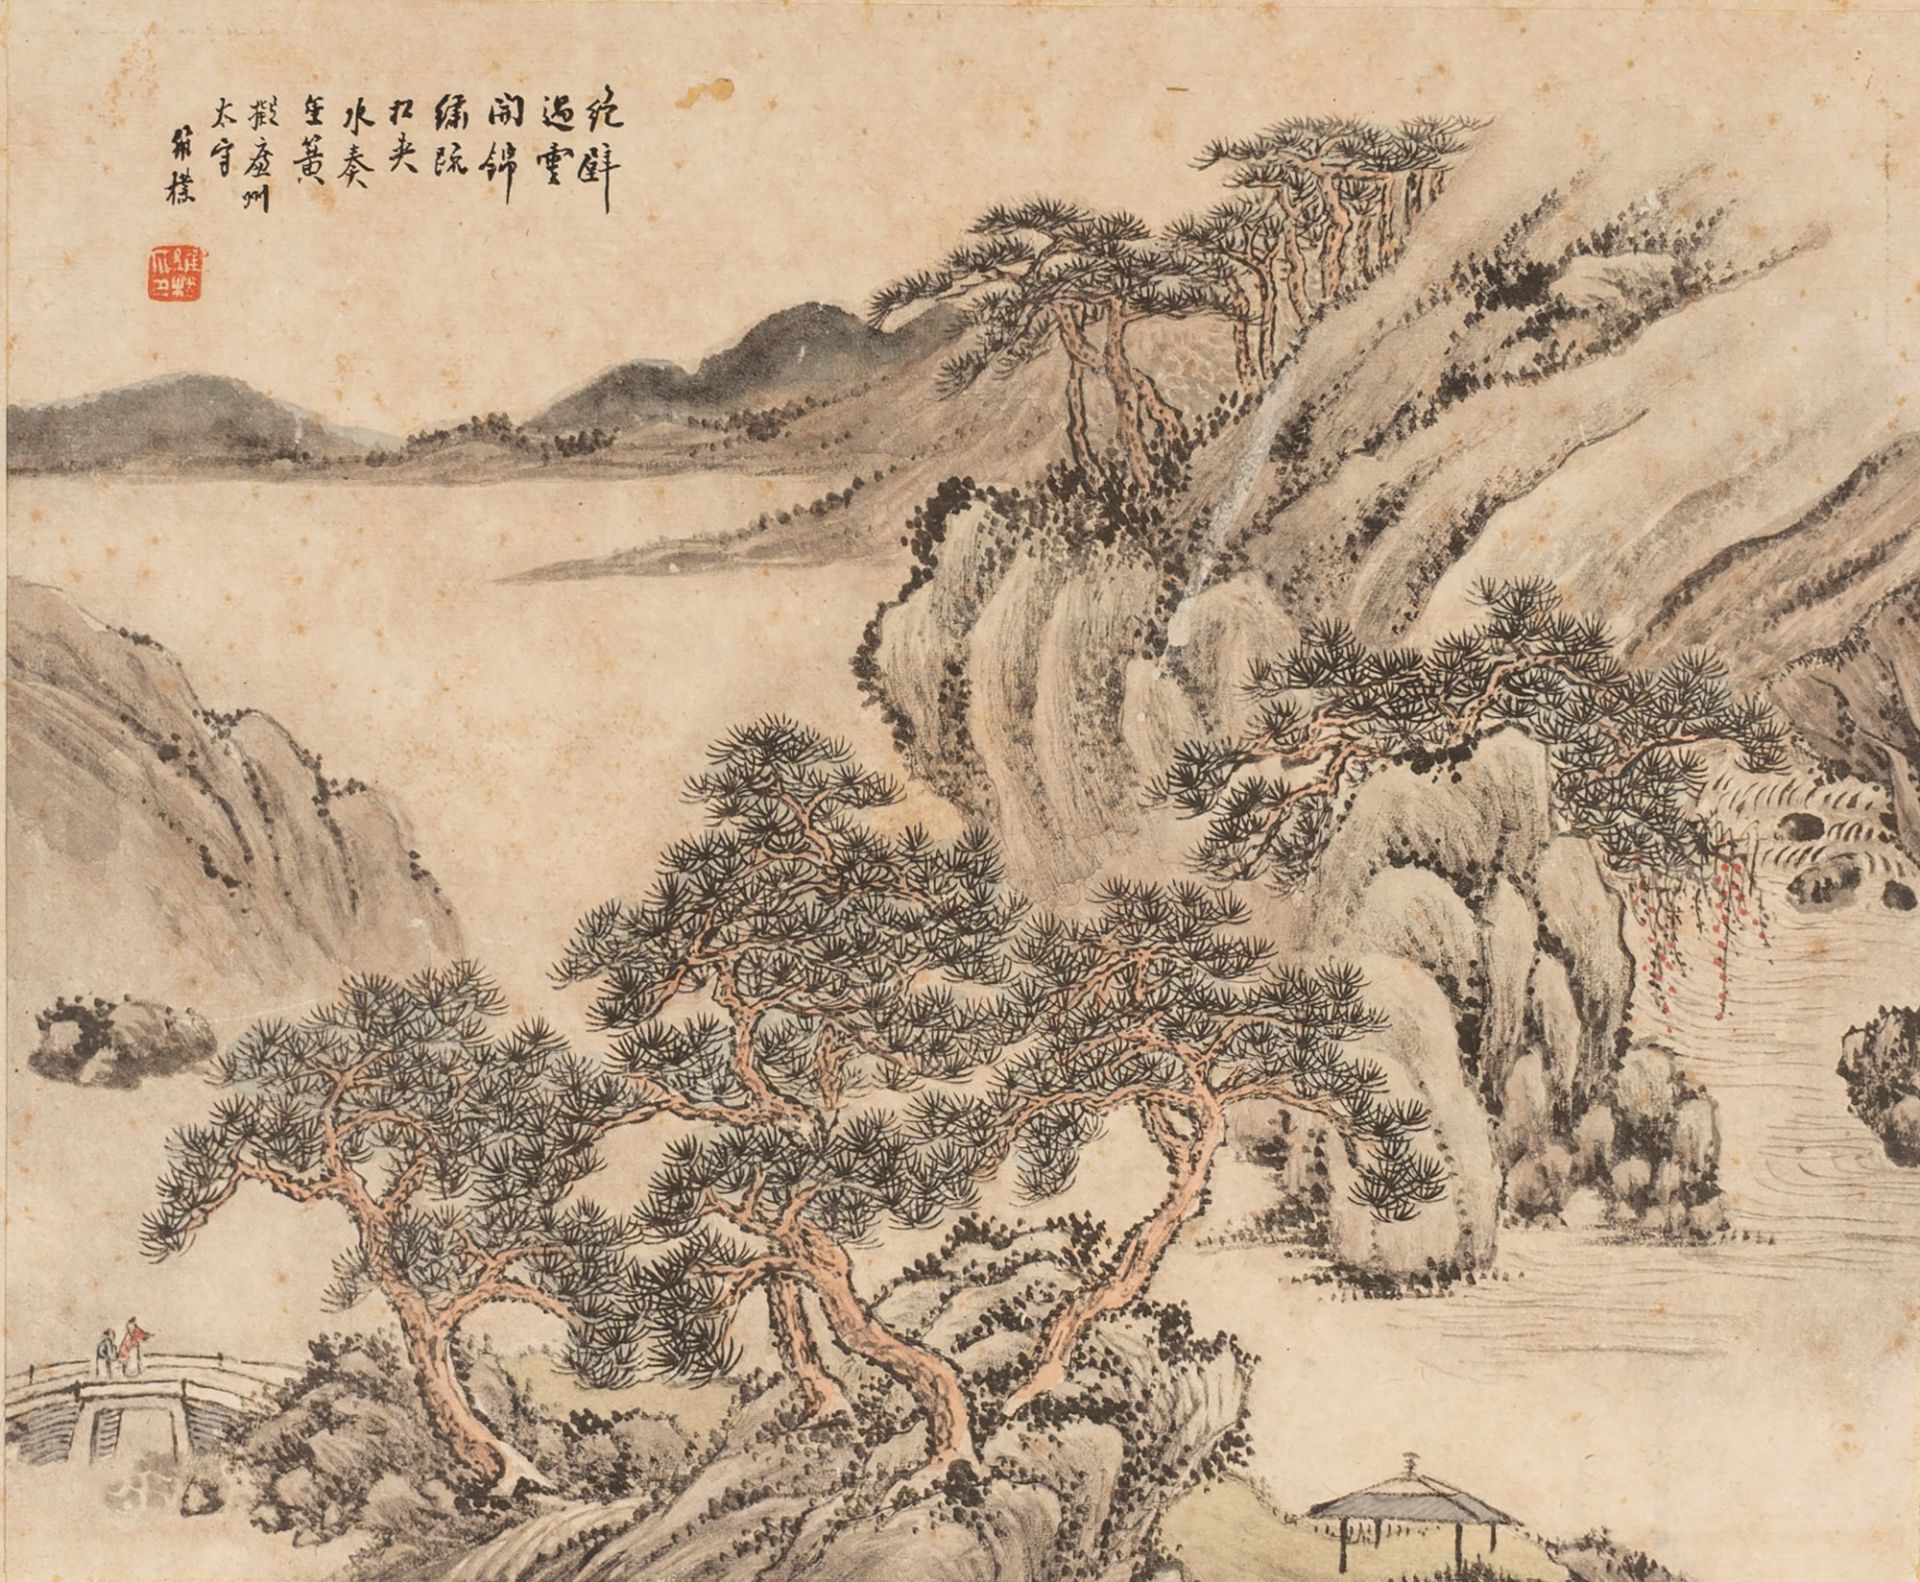 Two prints depicting landscapes, China, 18th century - Image 2 of 2